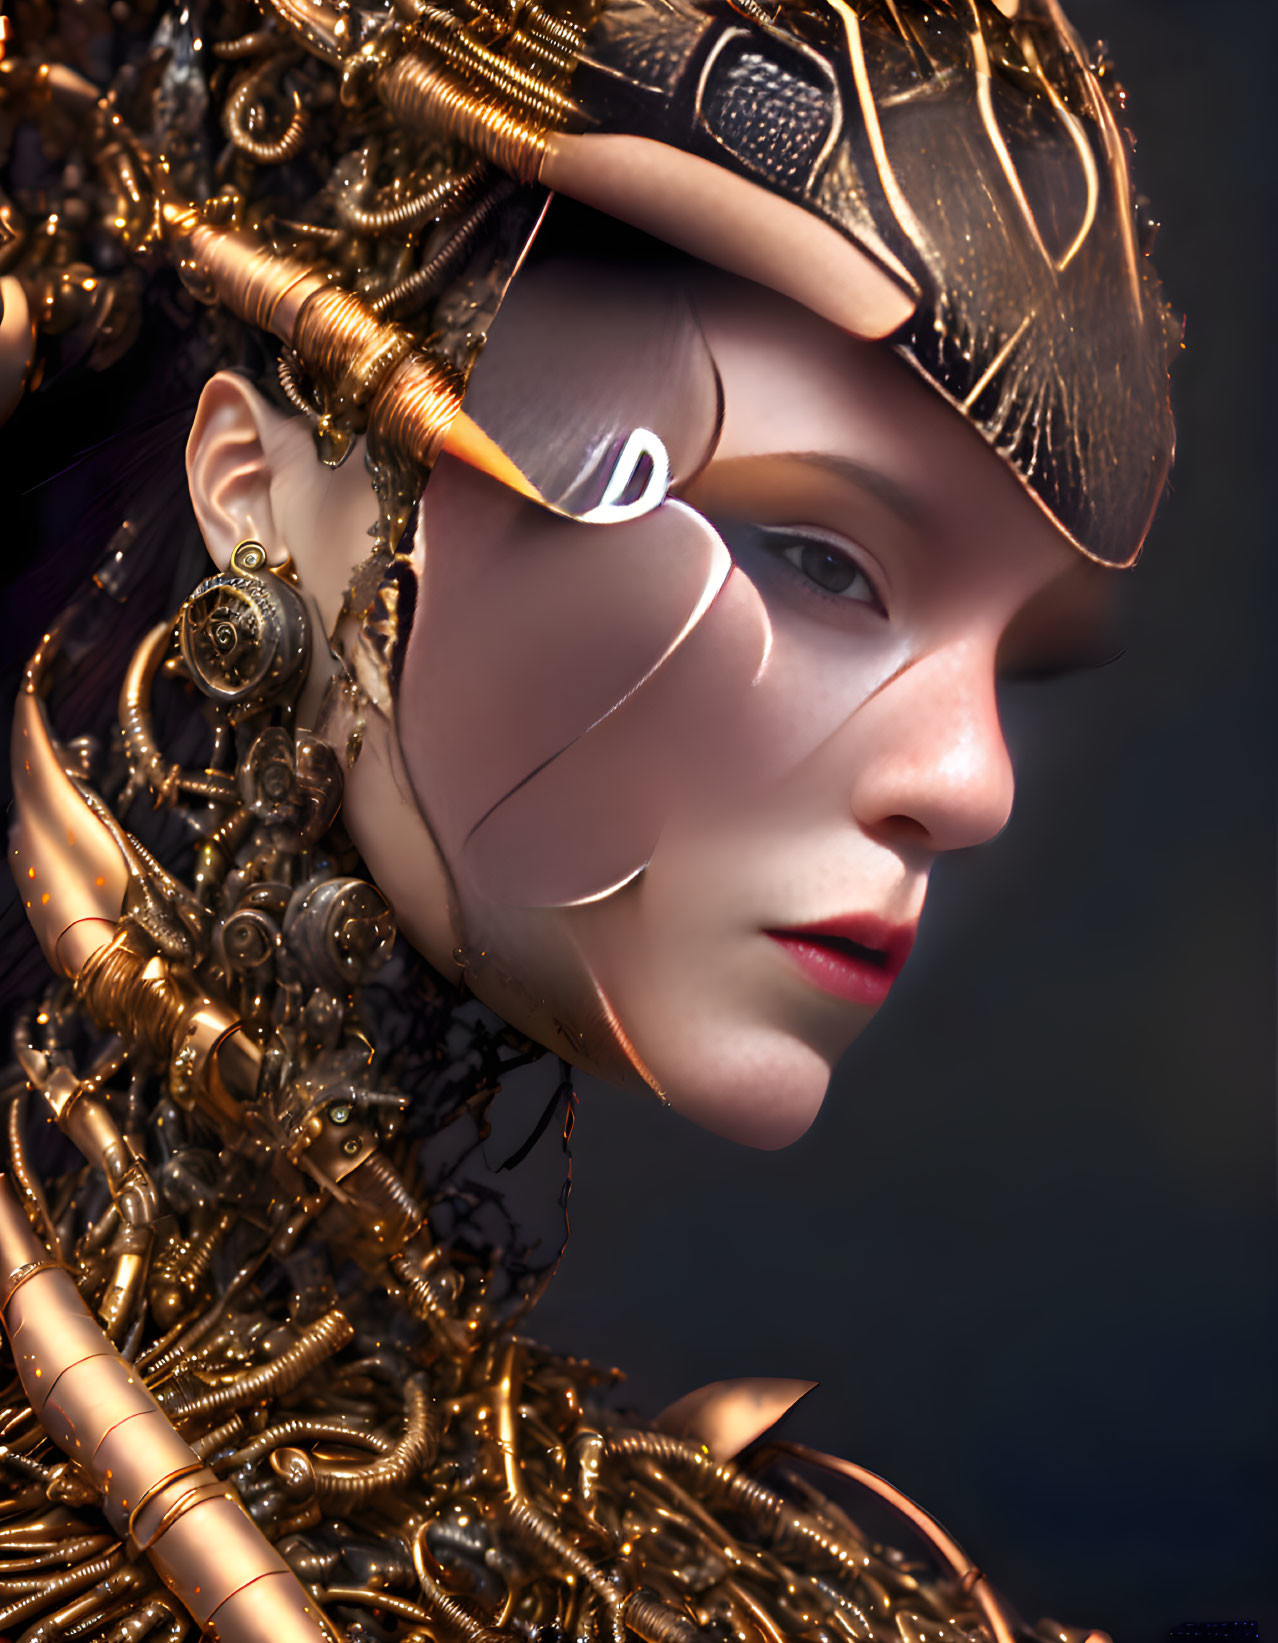 Futuristic woman with golden mechanical adornments and face mask.